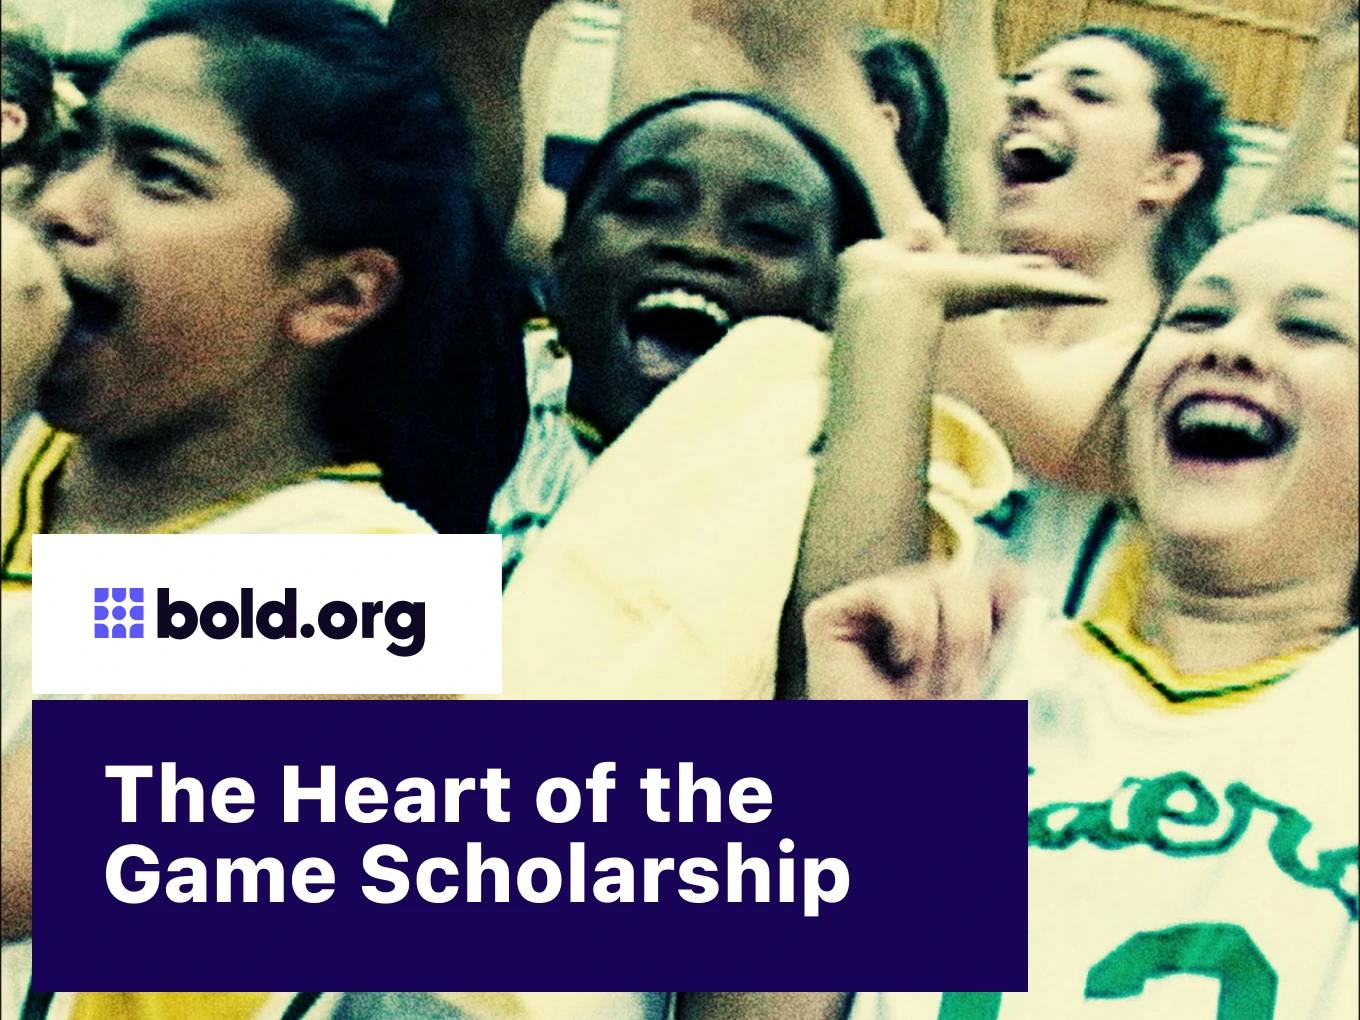 The Heart of the Game Scholarship